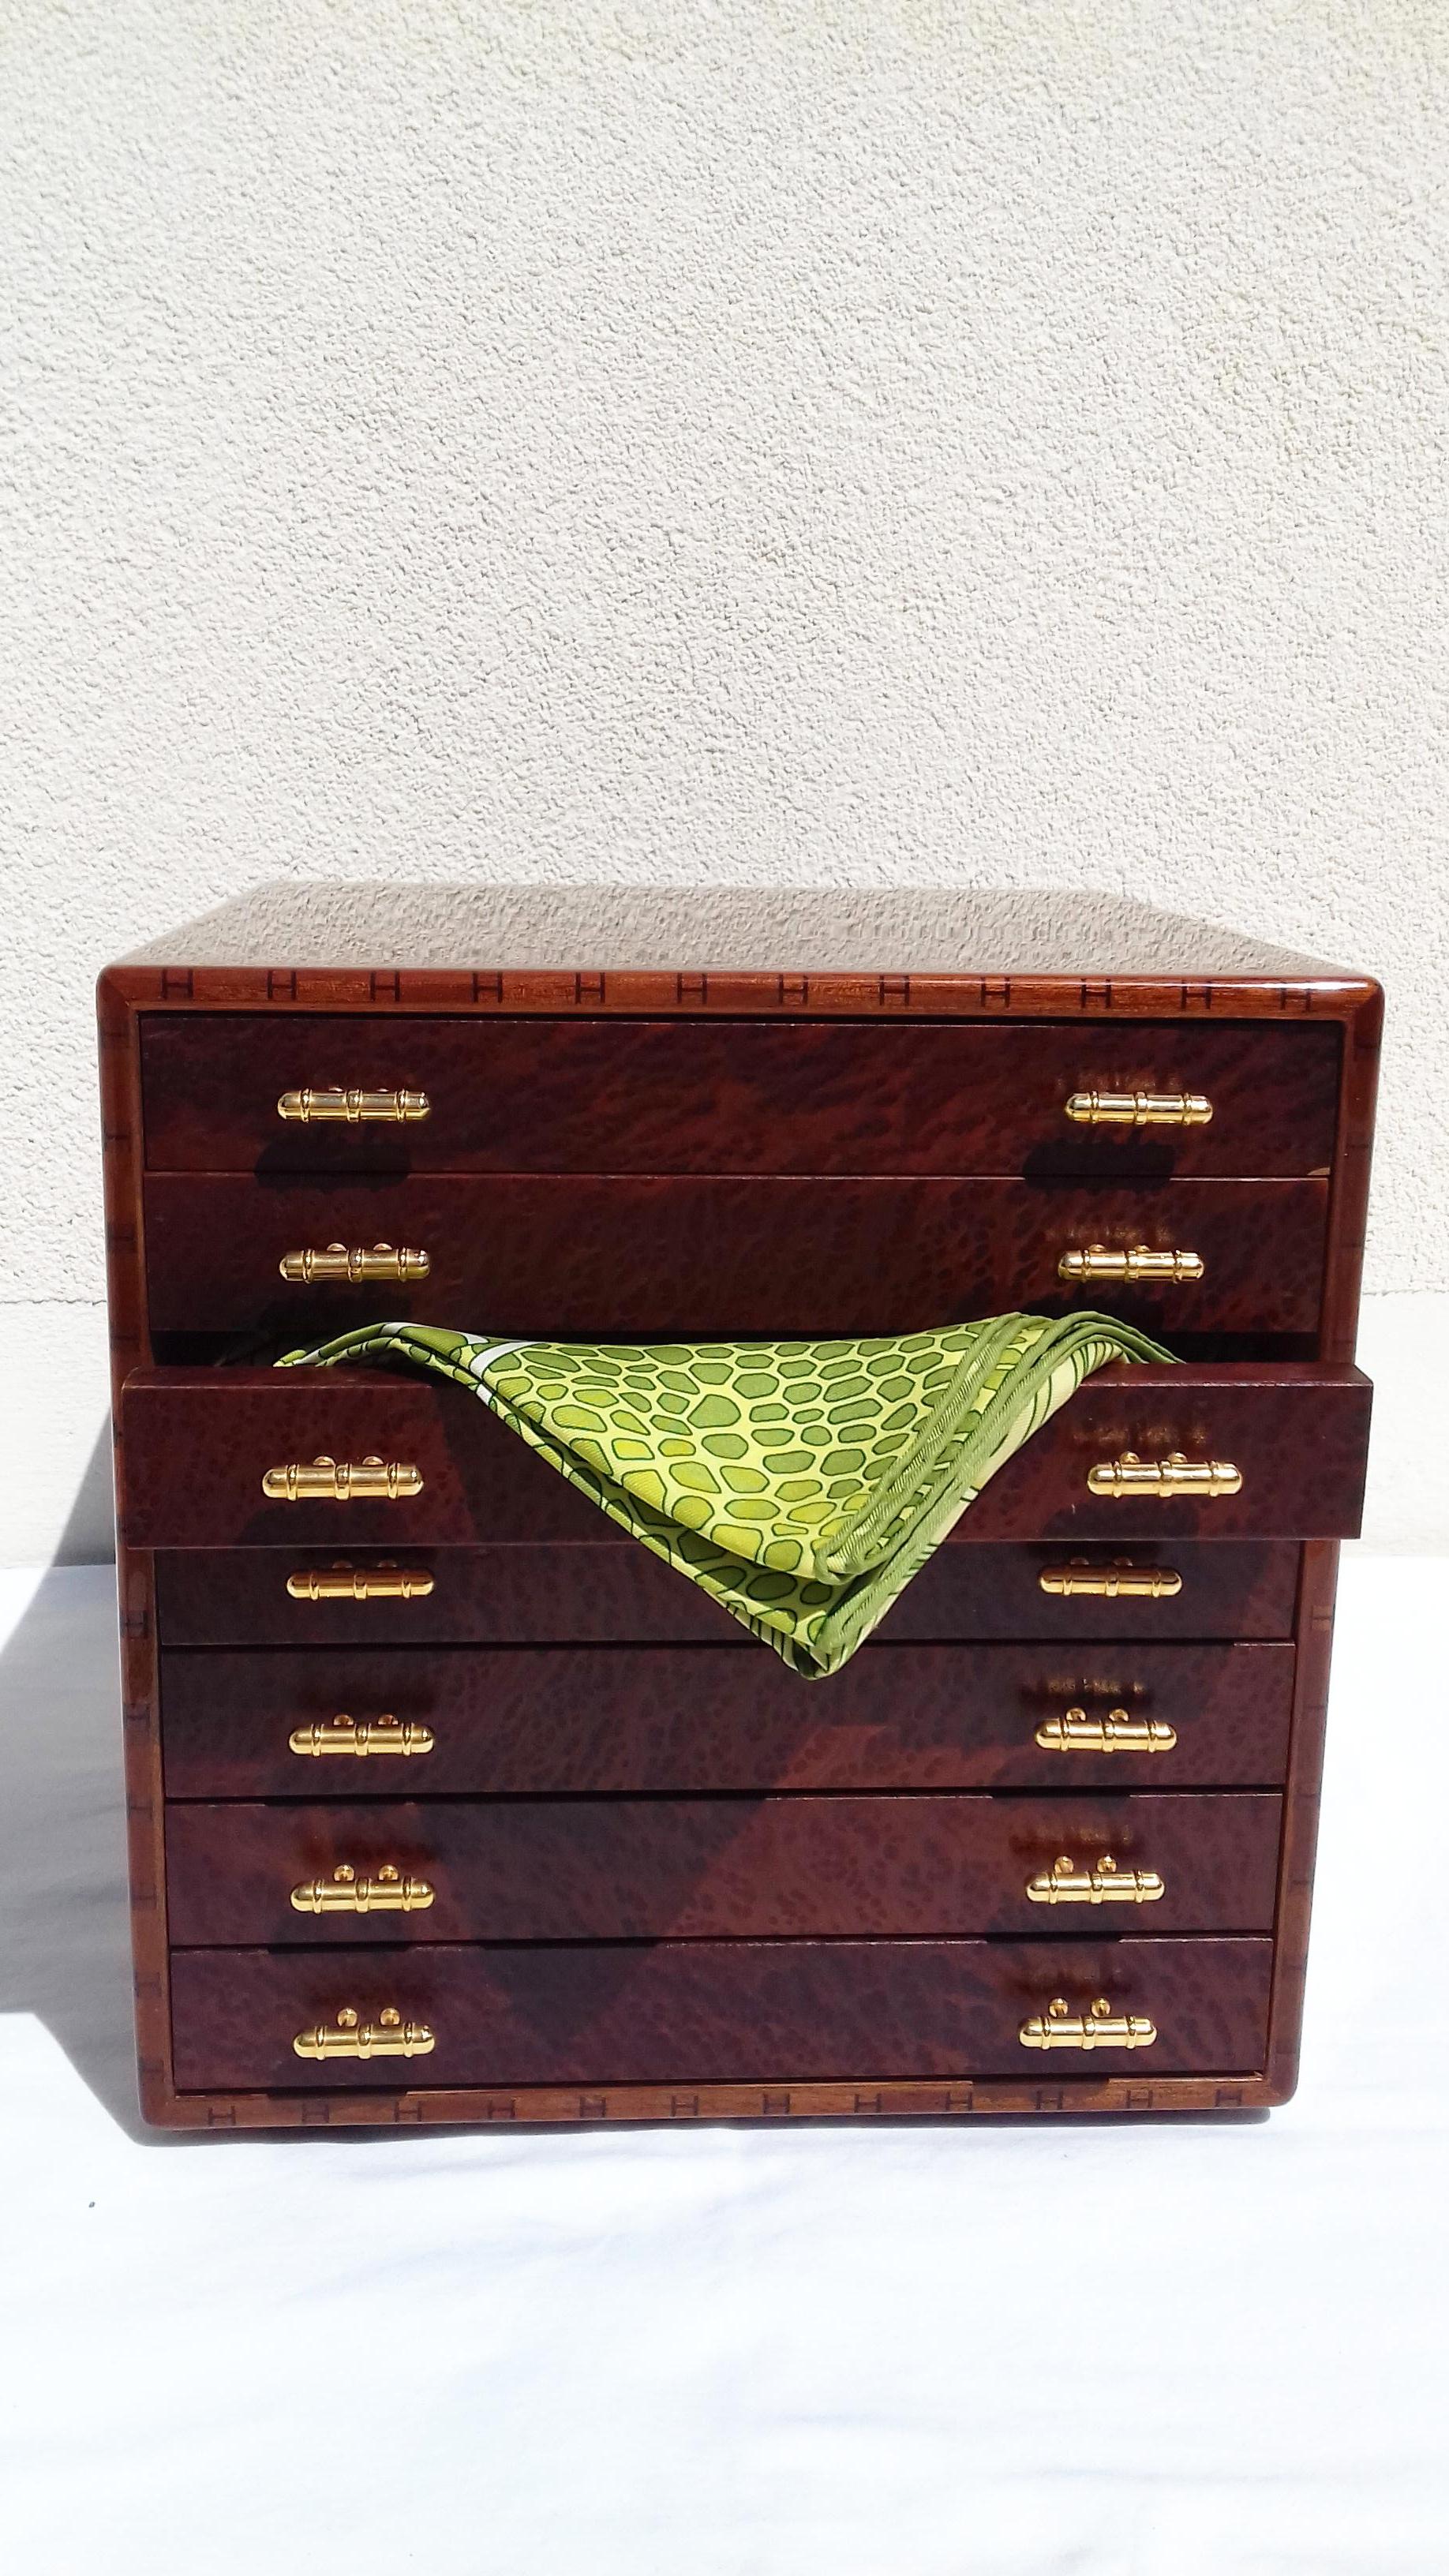 Rare and Gorgeous Authentic Hermès Drawer

To store scarves, but can be used for jewelry as well

Made of wooden and burr walnut veneer

Coloway: Brown (Pictures have been made at day light)

Includes 7 drawers in wood, each opening with 2 small